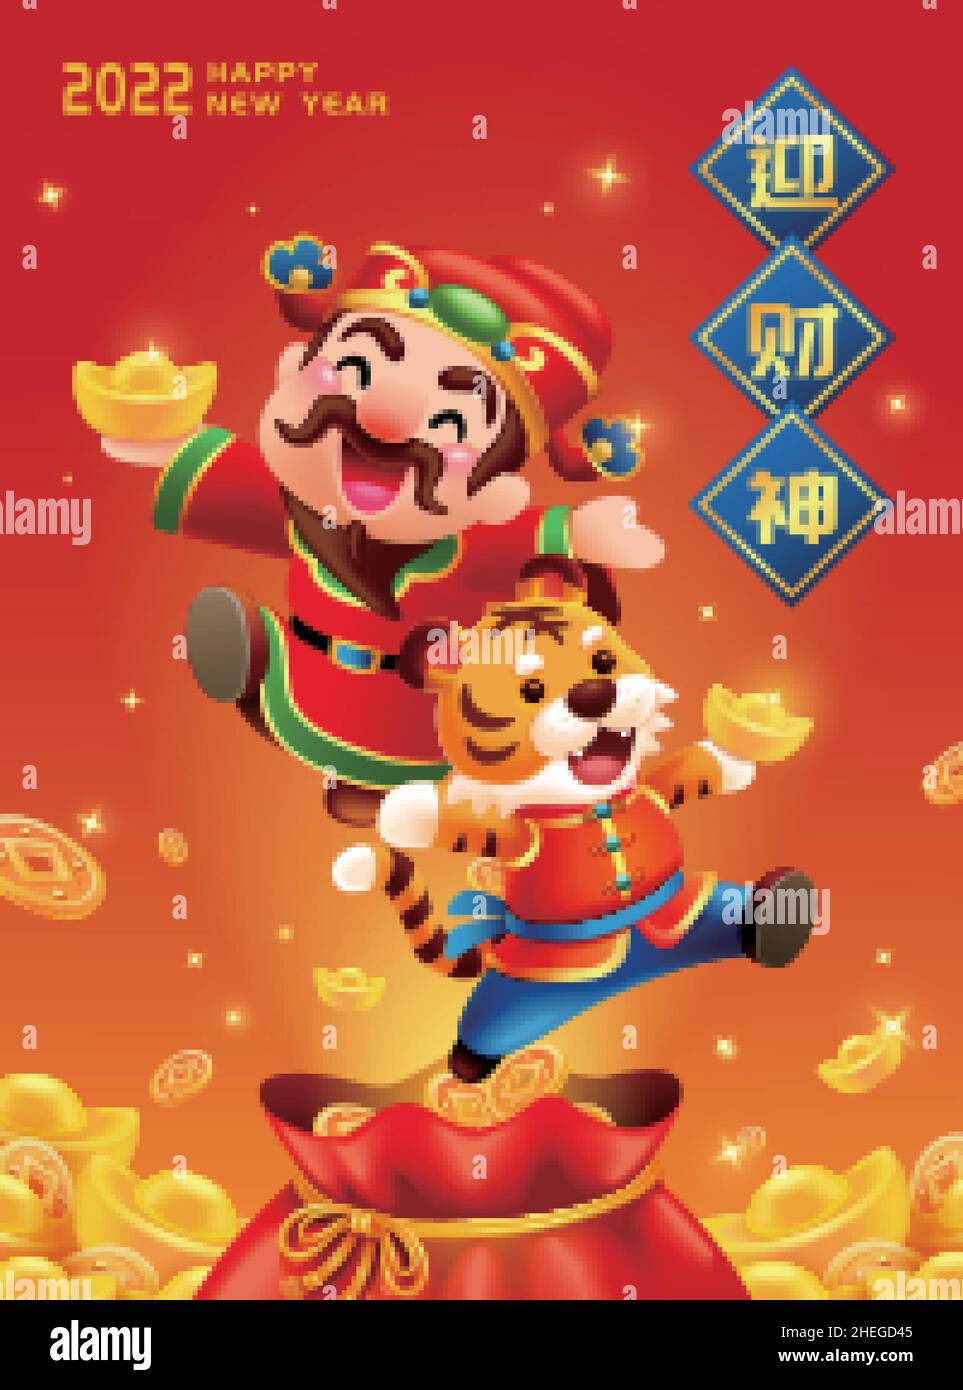 2022 CNY Caishen poster. Illustration of a tiger in Chinese costume and Caishen jumping out from a money bag holding gold ingots on their hands. Trans Stock Vector